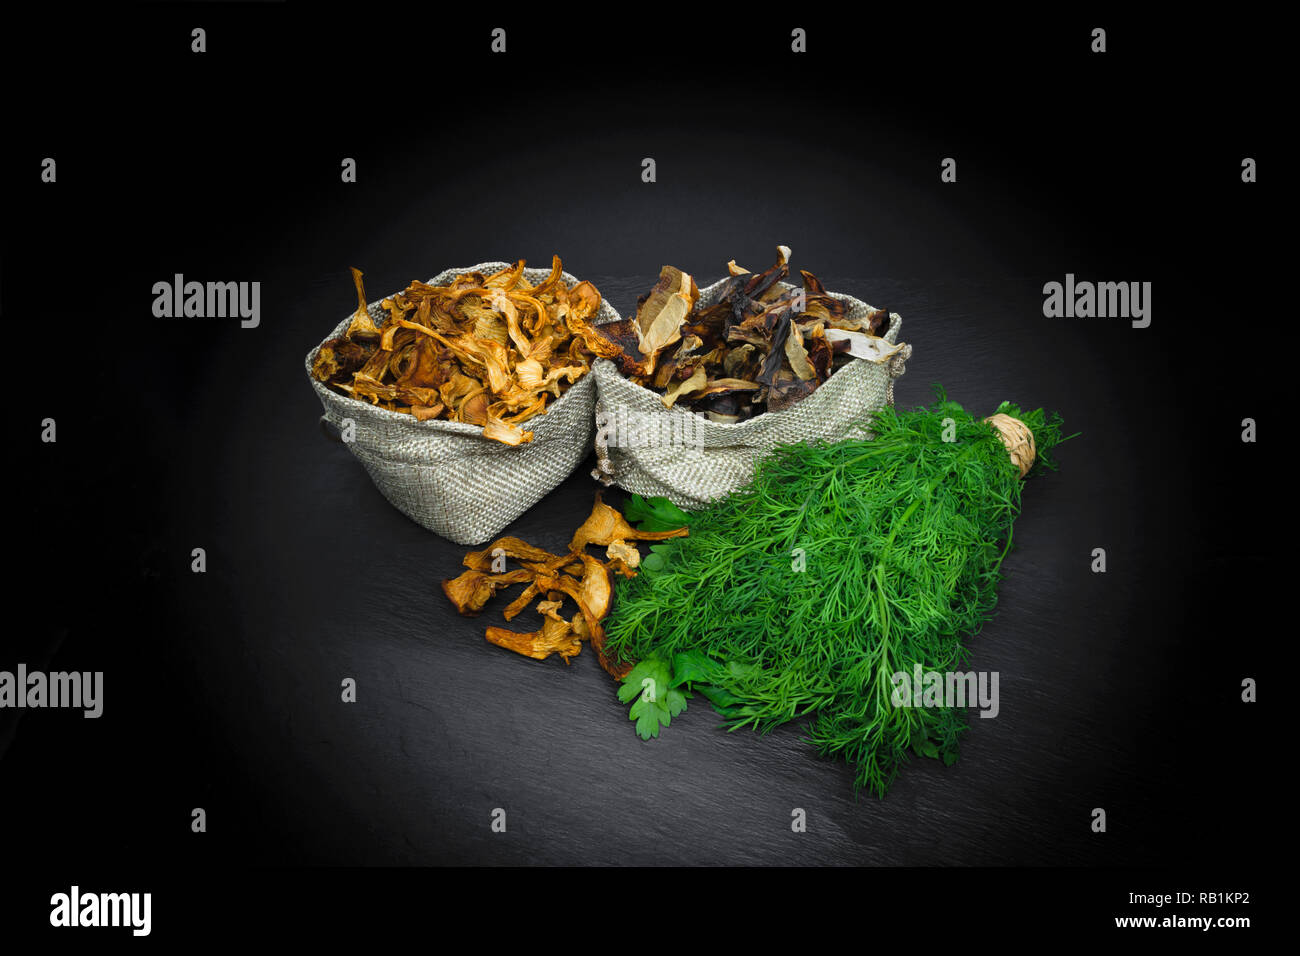 Composition of dry boletus and chanterelles mushrooms placed in canvas bags with dill and parsley broom on black stone background surface with copy sp Stock Photo